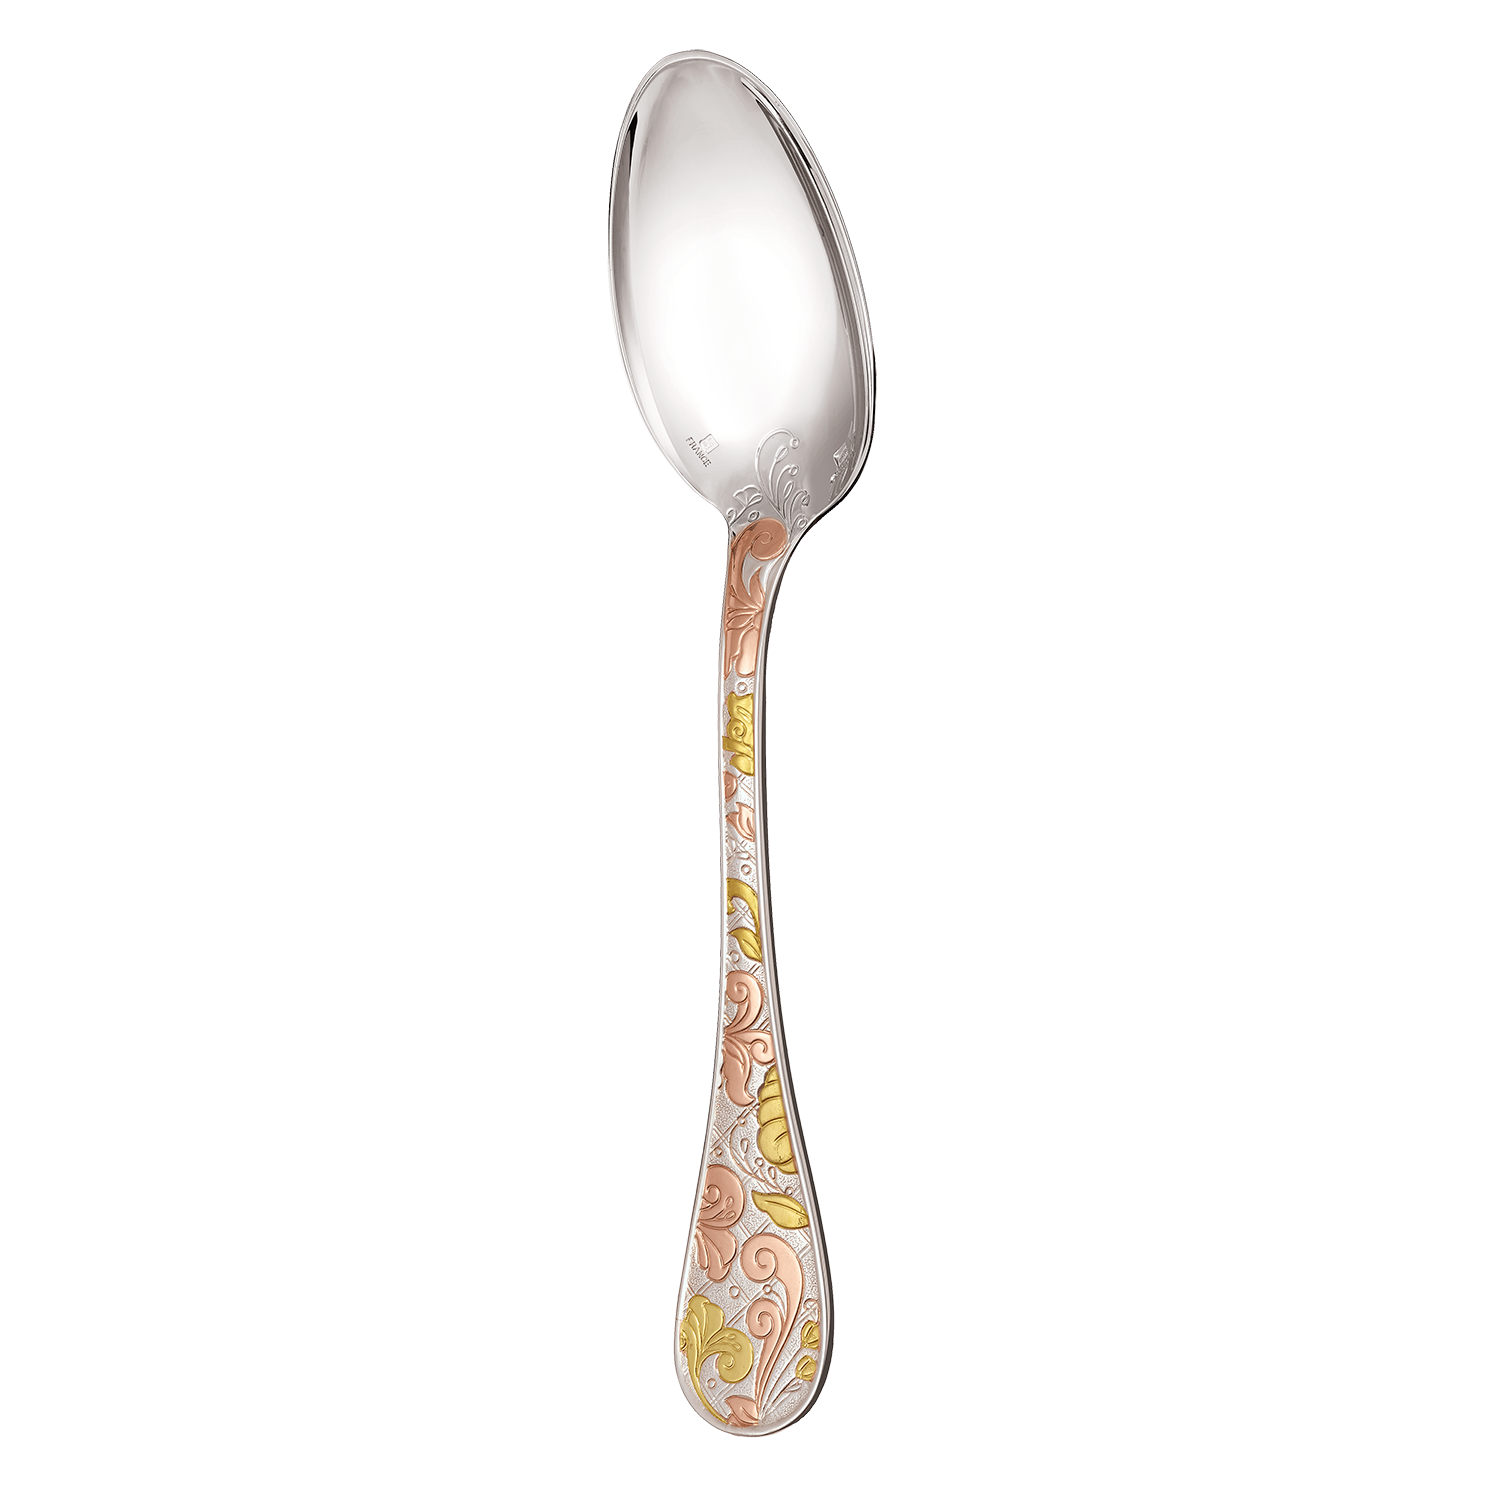 Partially gilded Silver-Plated table spoon - pink and yellow gold